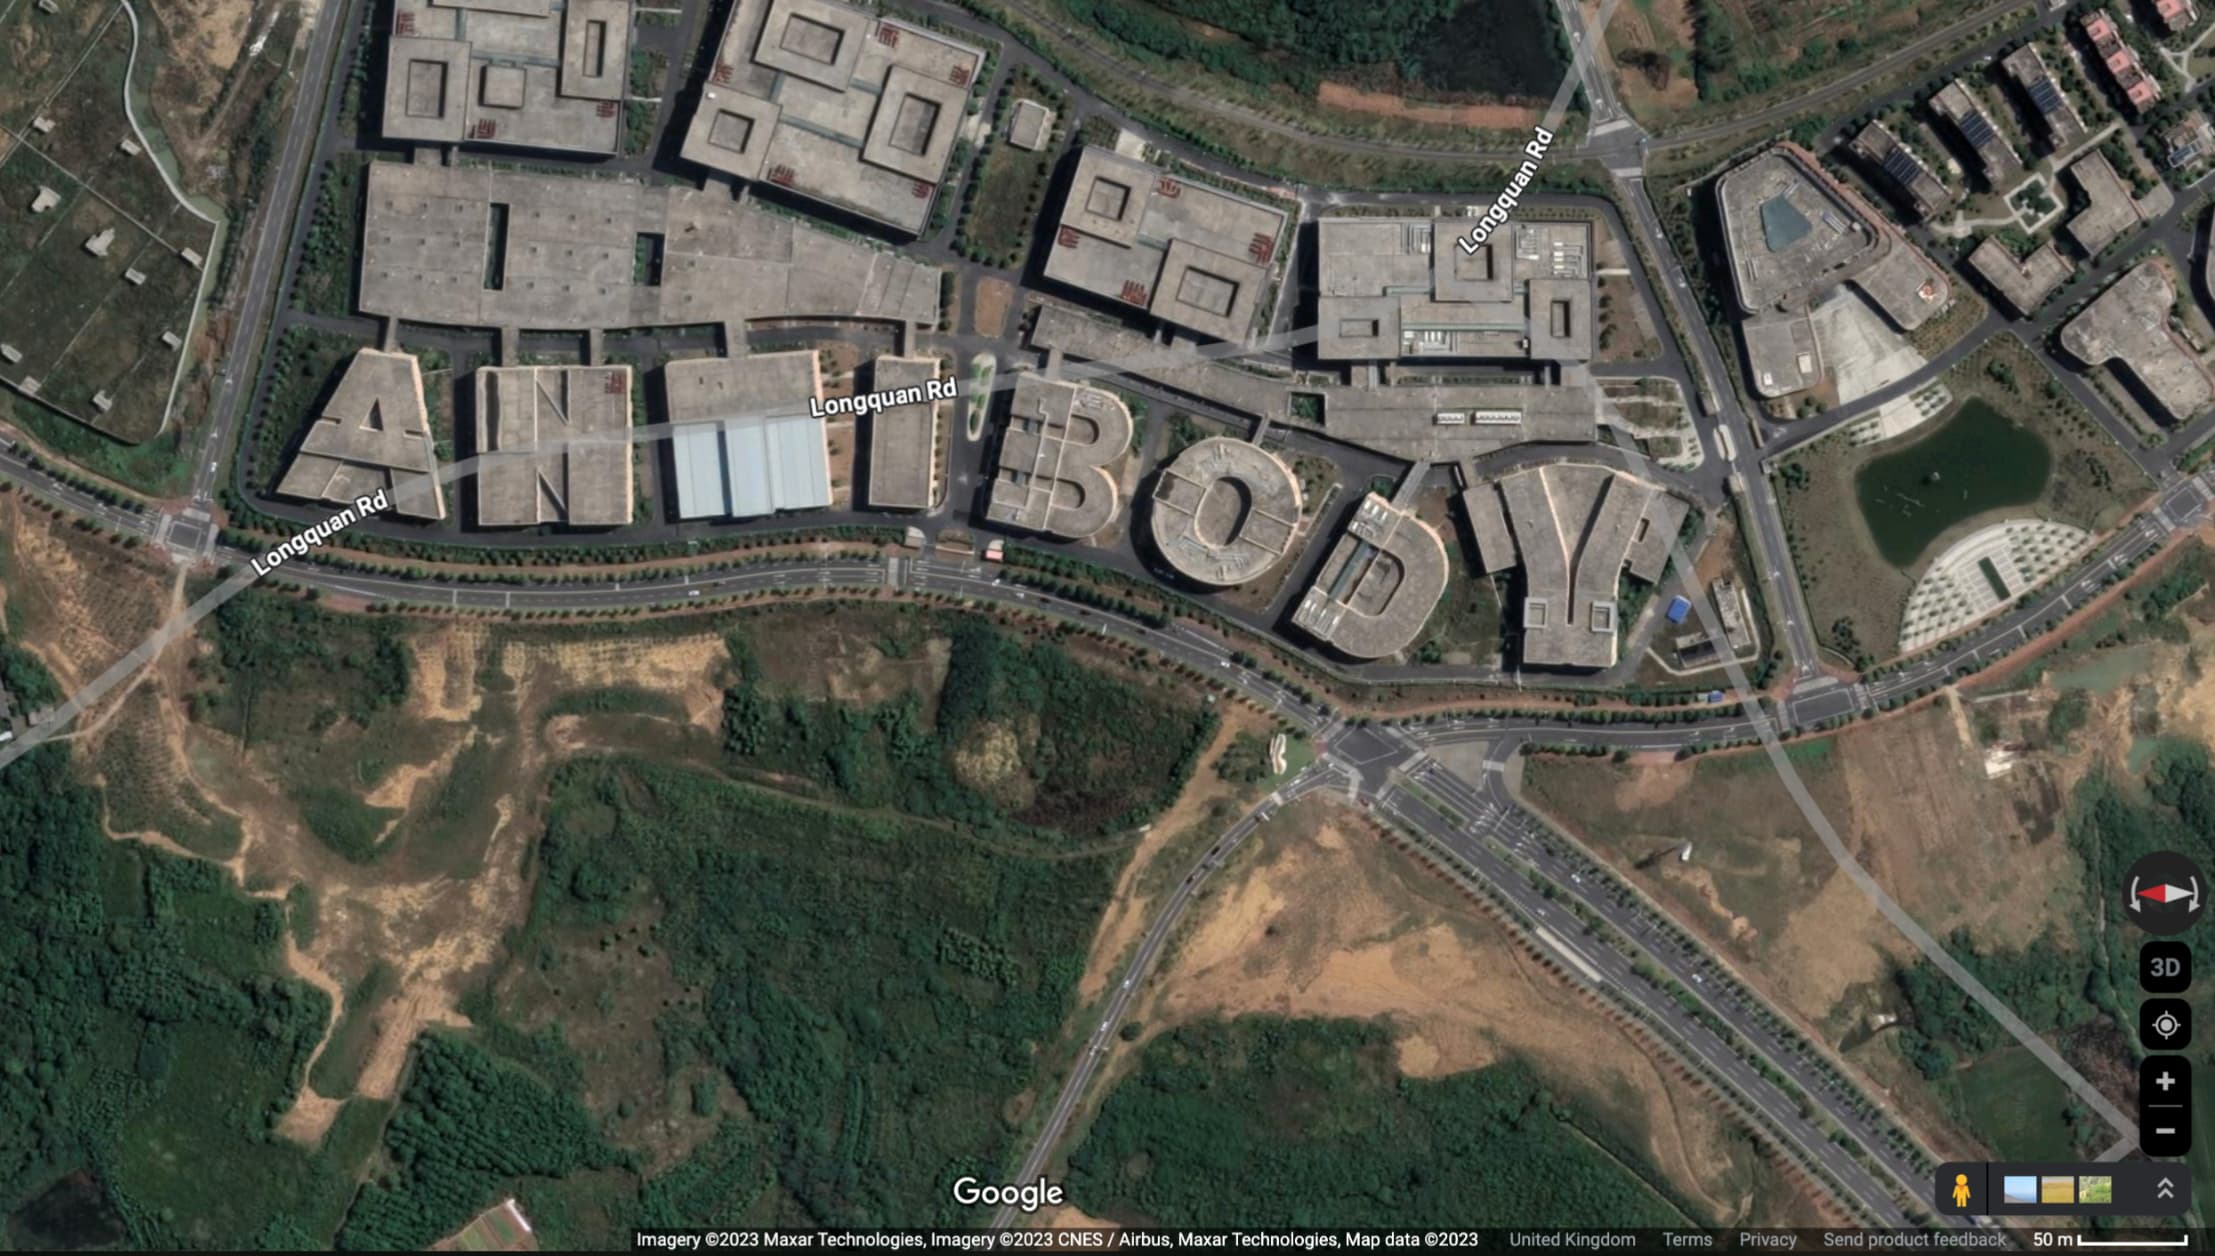 aerial photography - Aft Longquan Rd 223 Longquan Rd Bo Google Longquan Rd Imagery 2023 Maxar Technologies, Imagery 2023 Cnes Airbus, Maxar Technologies, Map data 2023 United Kingdom Terms Privacy Send product feedback 50 ml 3D